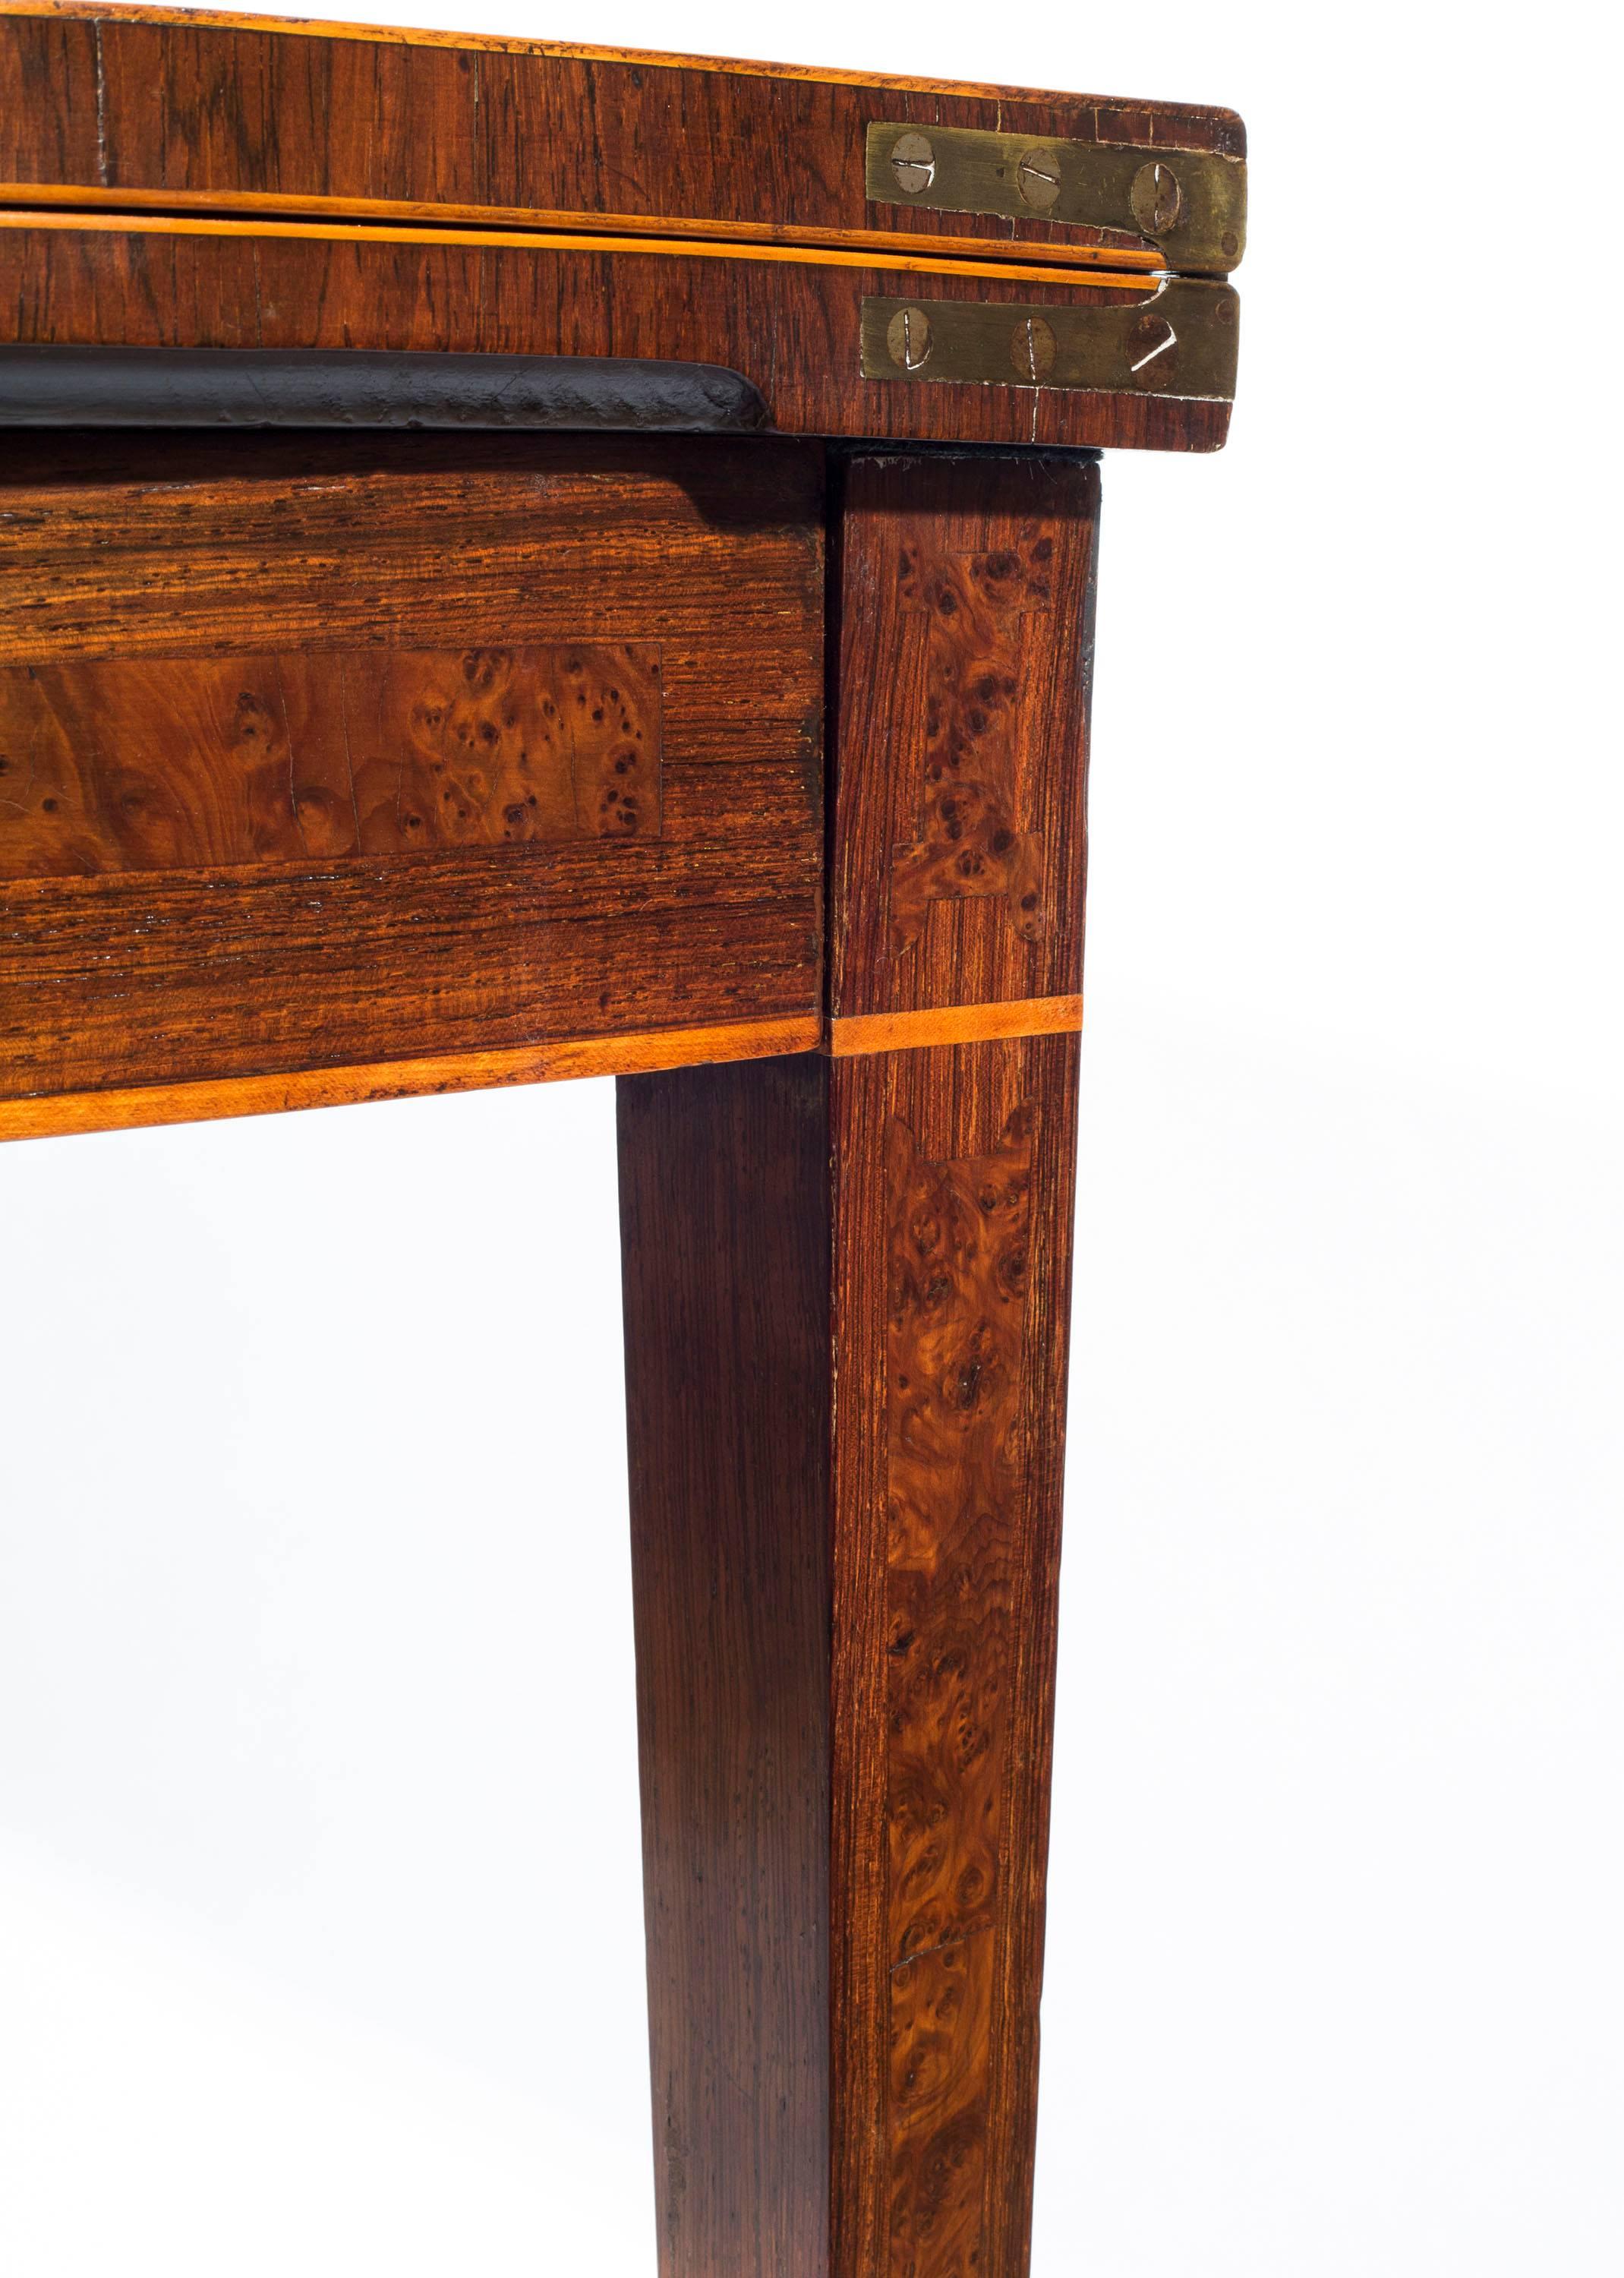 Padouk English 18th Century George III Burl Yew and Fustic Inlaid D-shaped Side Table